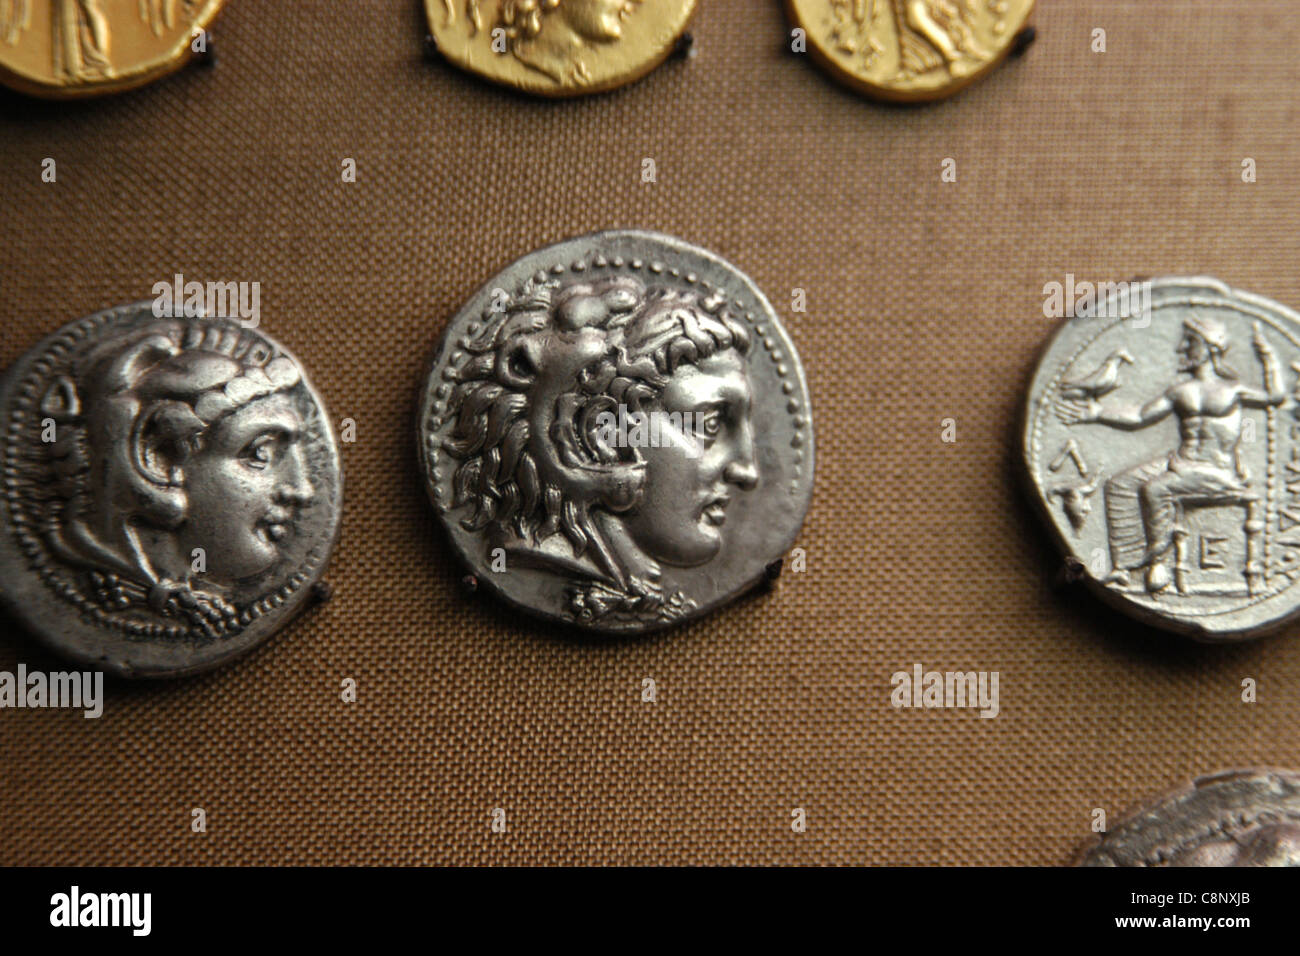 Ancient Greek coins of Alexander the Great from the numismatic collection of the Pergamon Museum in Berlin, Germany. Stock Photo